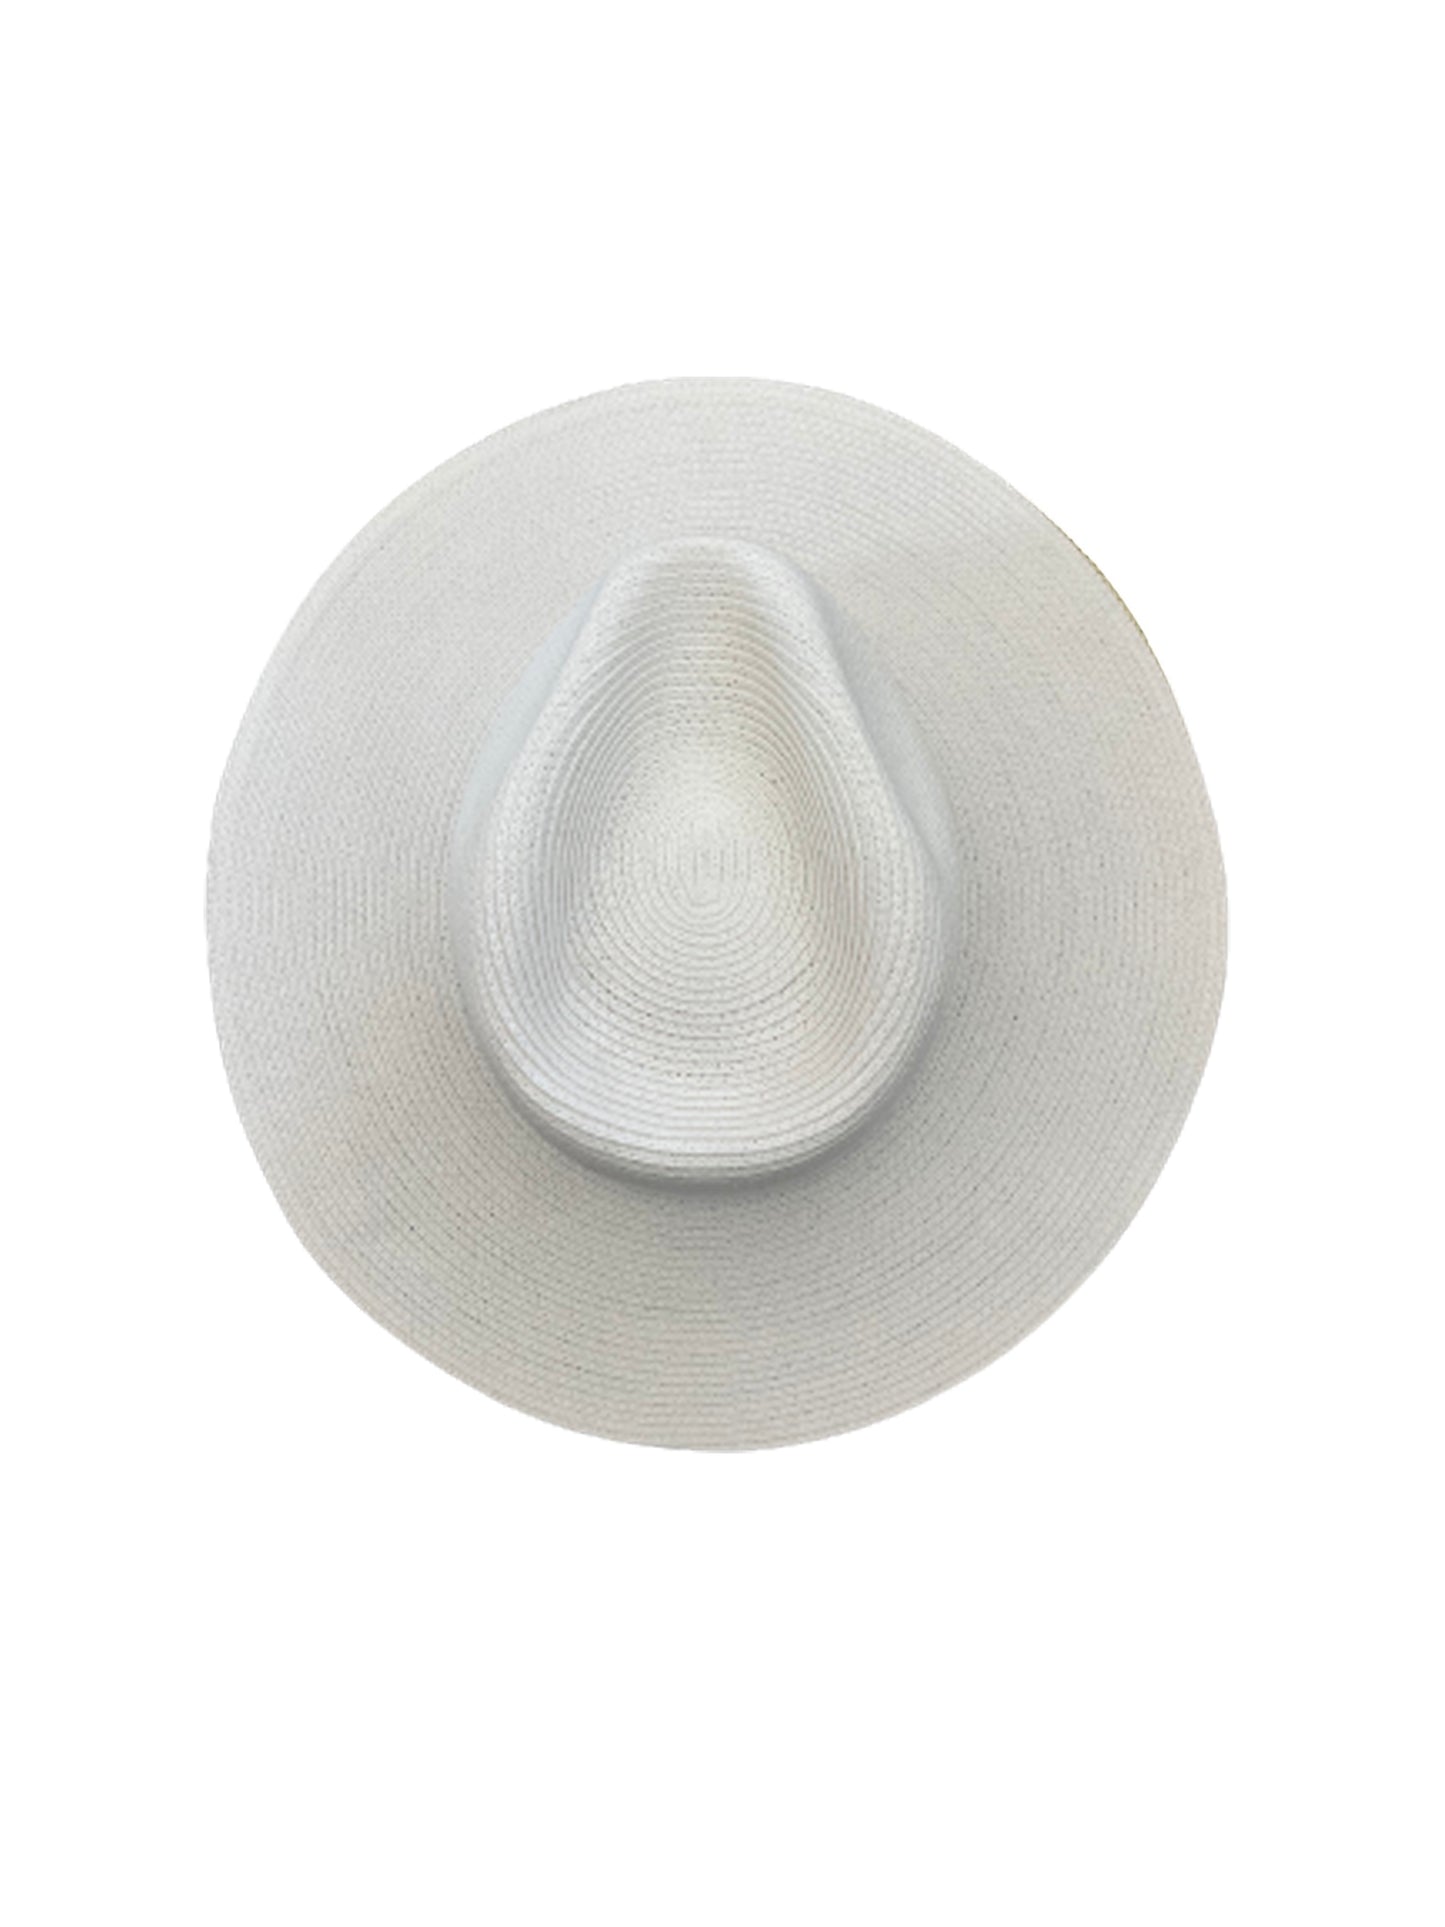 the native hat white top